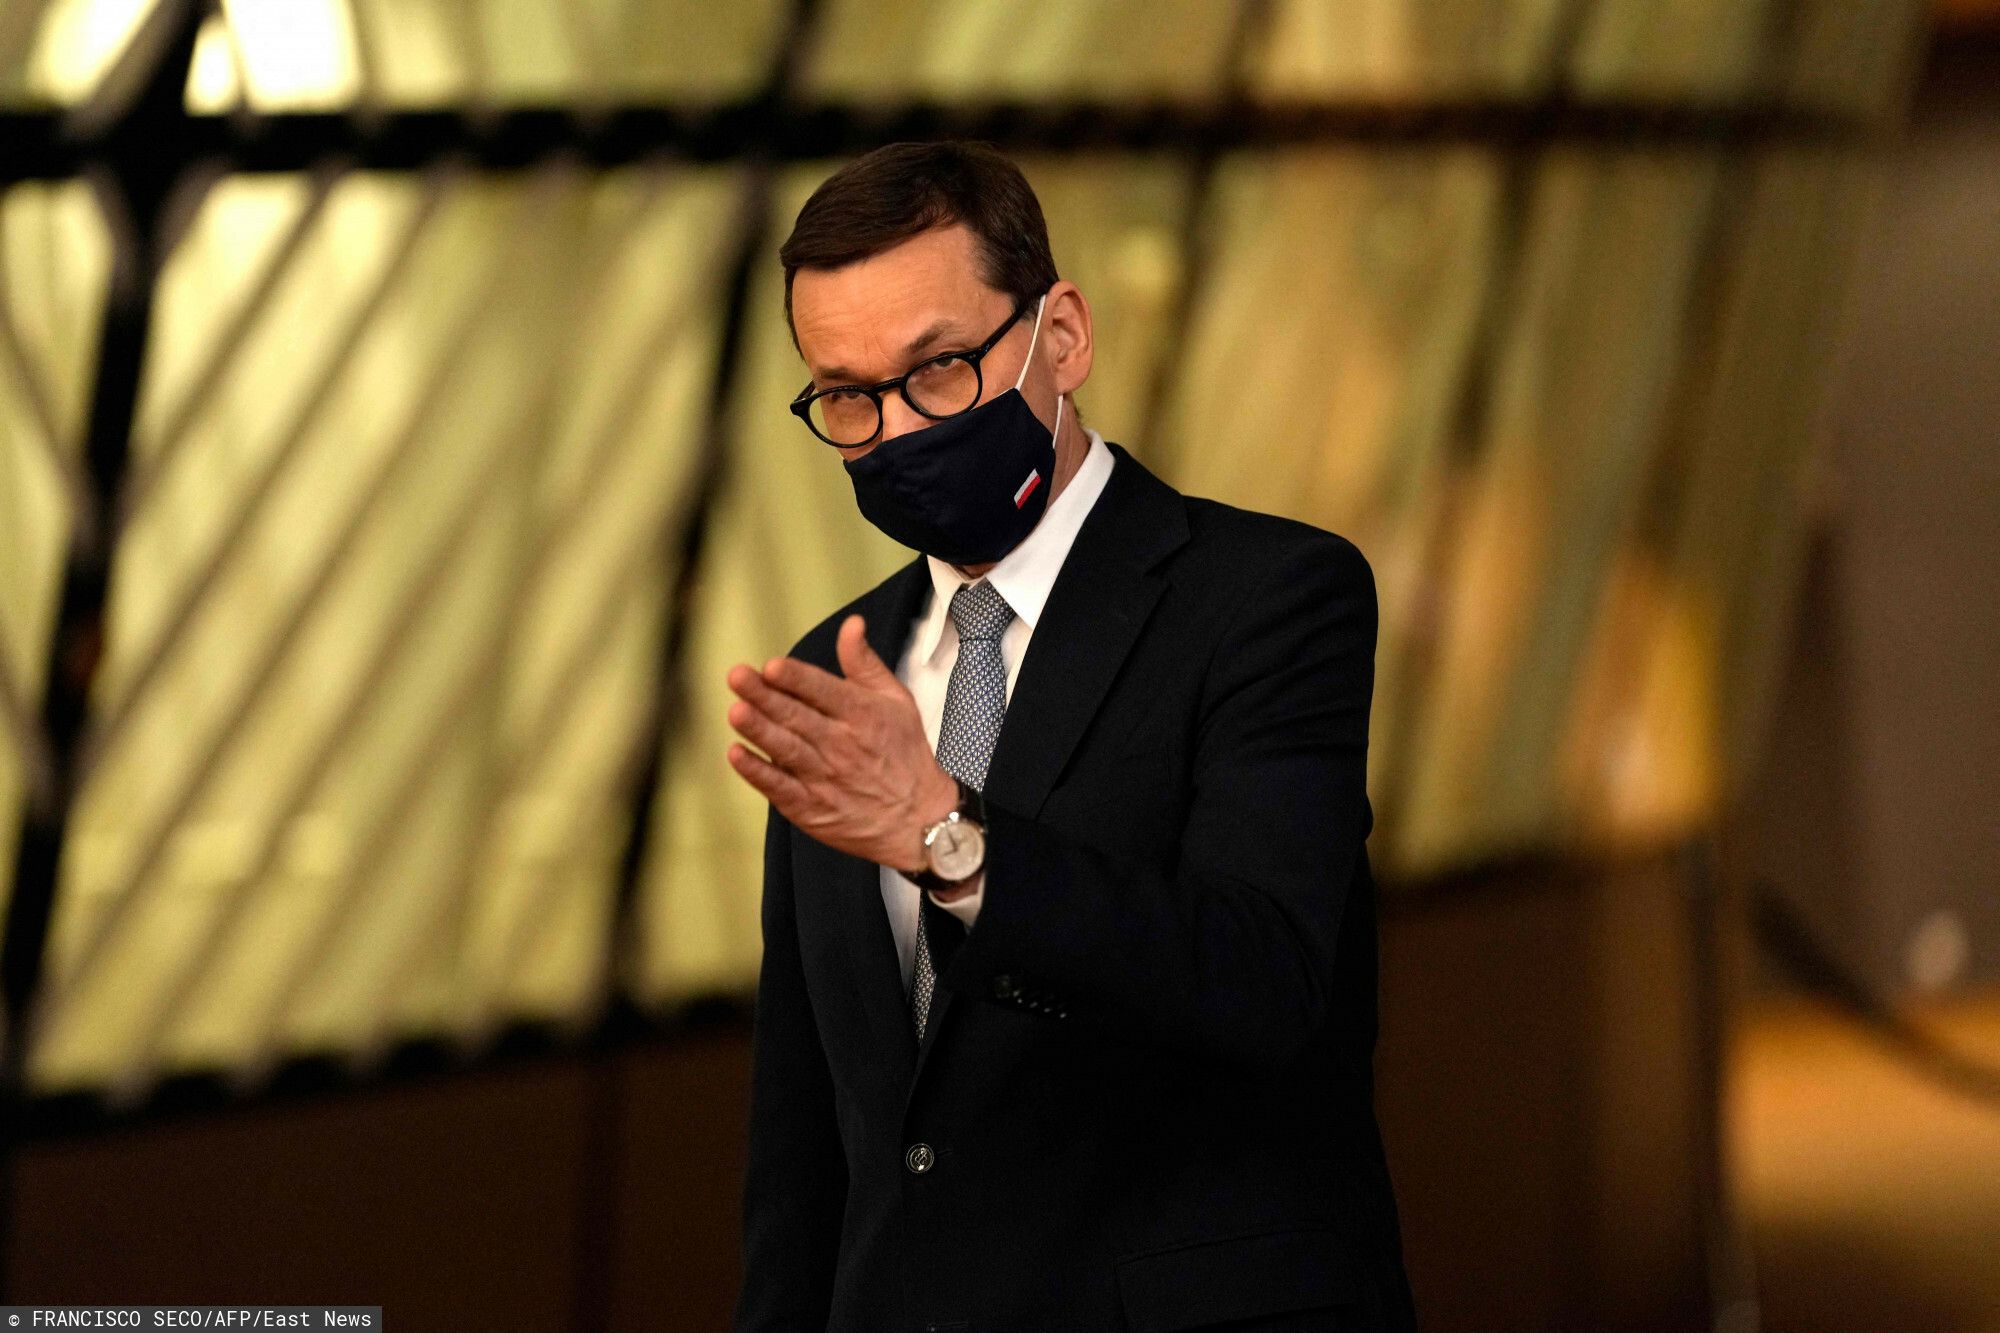 Poland's Prime Minister Mateusz Morawiecki speaks with the media as he departs at the end of the first day of the EU summit at the European Council building in Brussels on May 24, 2021. - European Union leaders take part in a two day in-person meeting to 